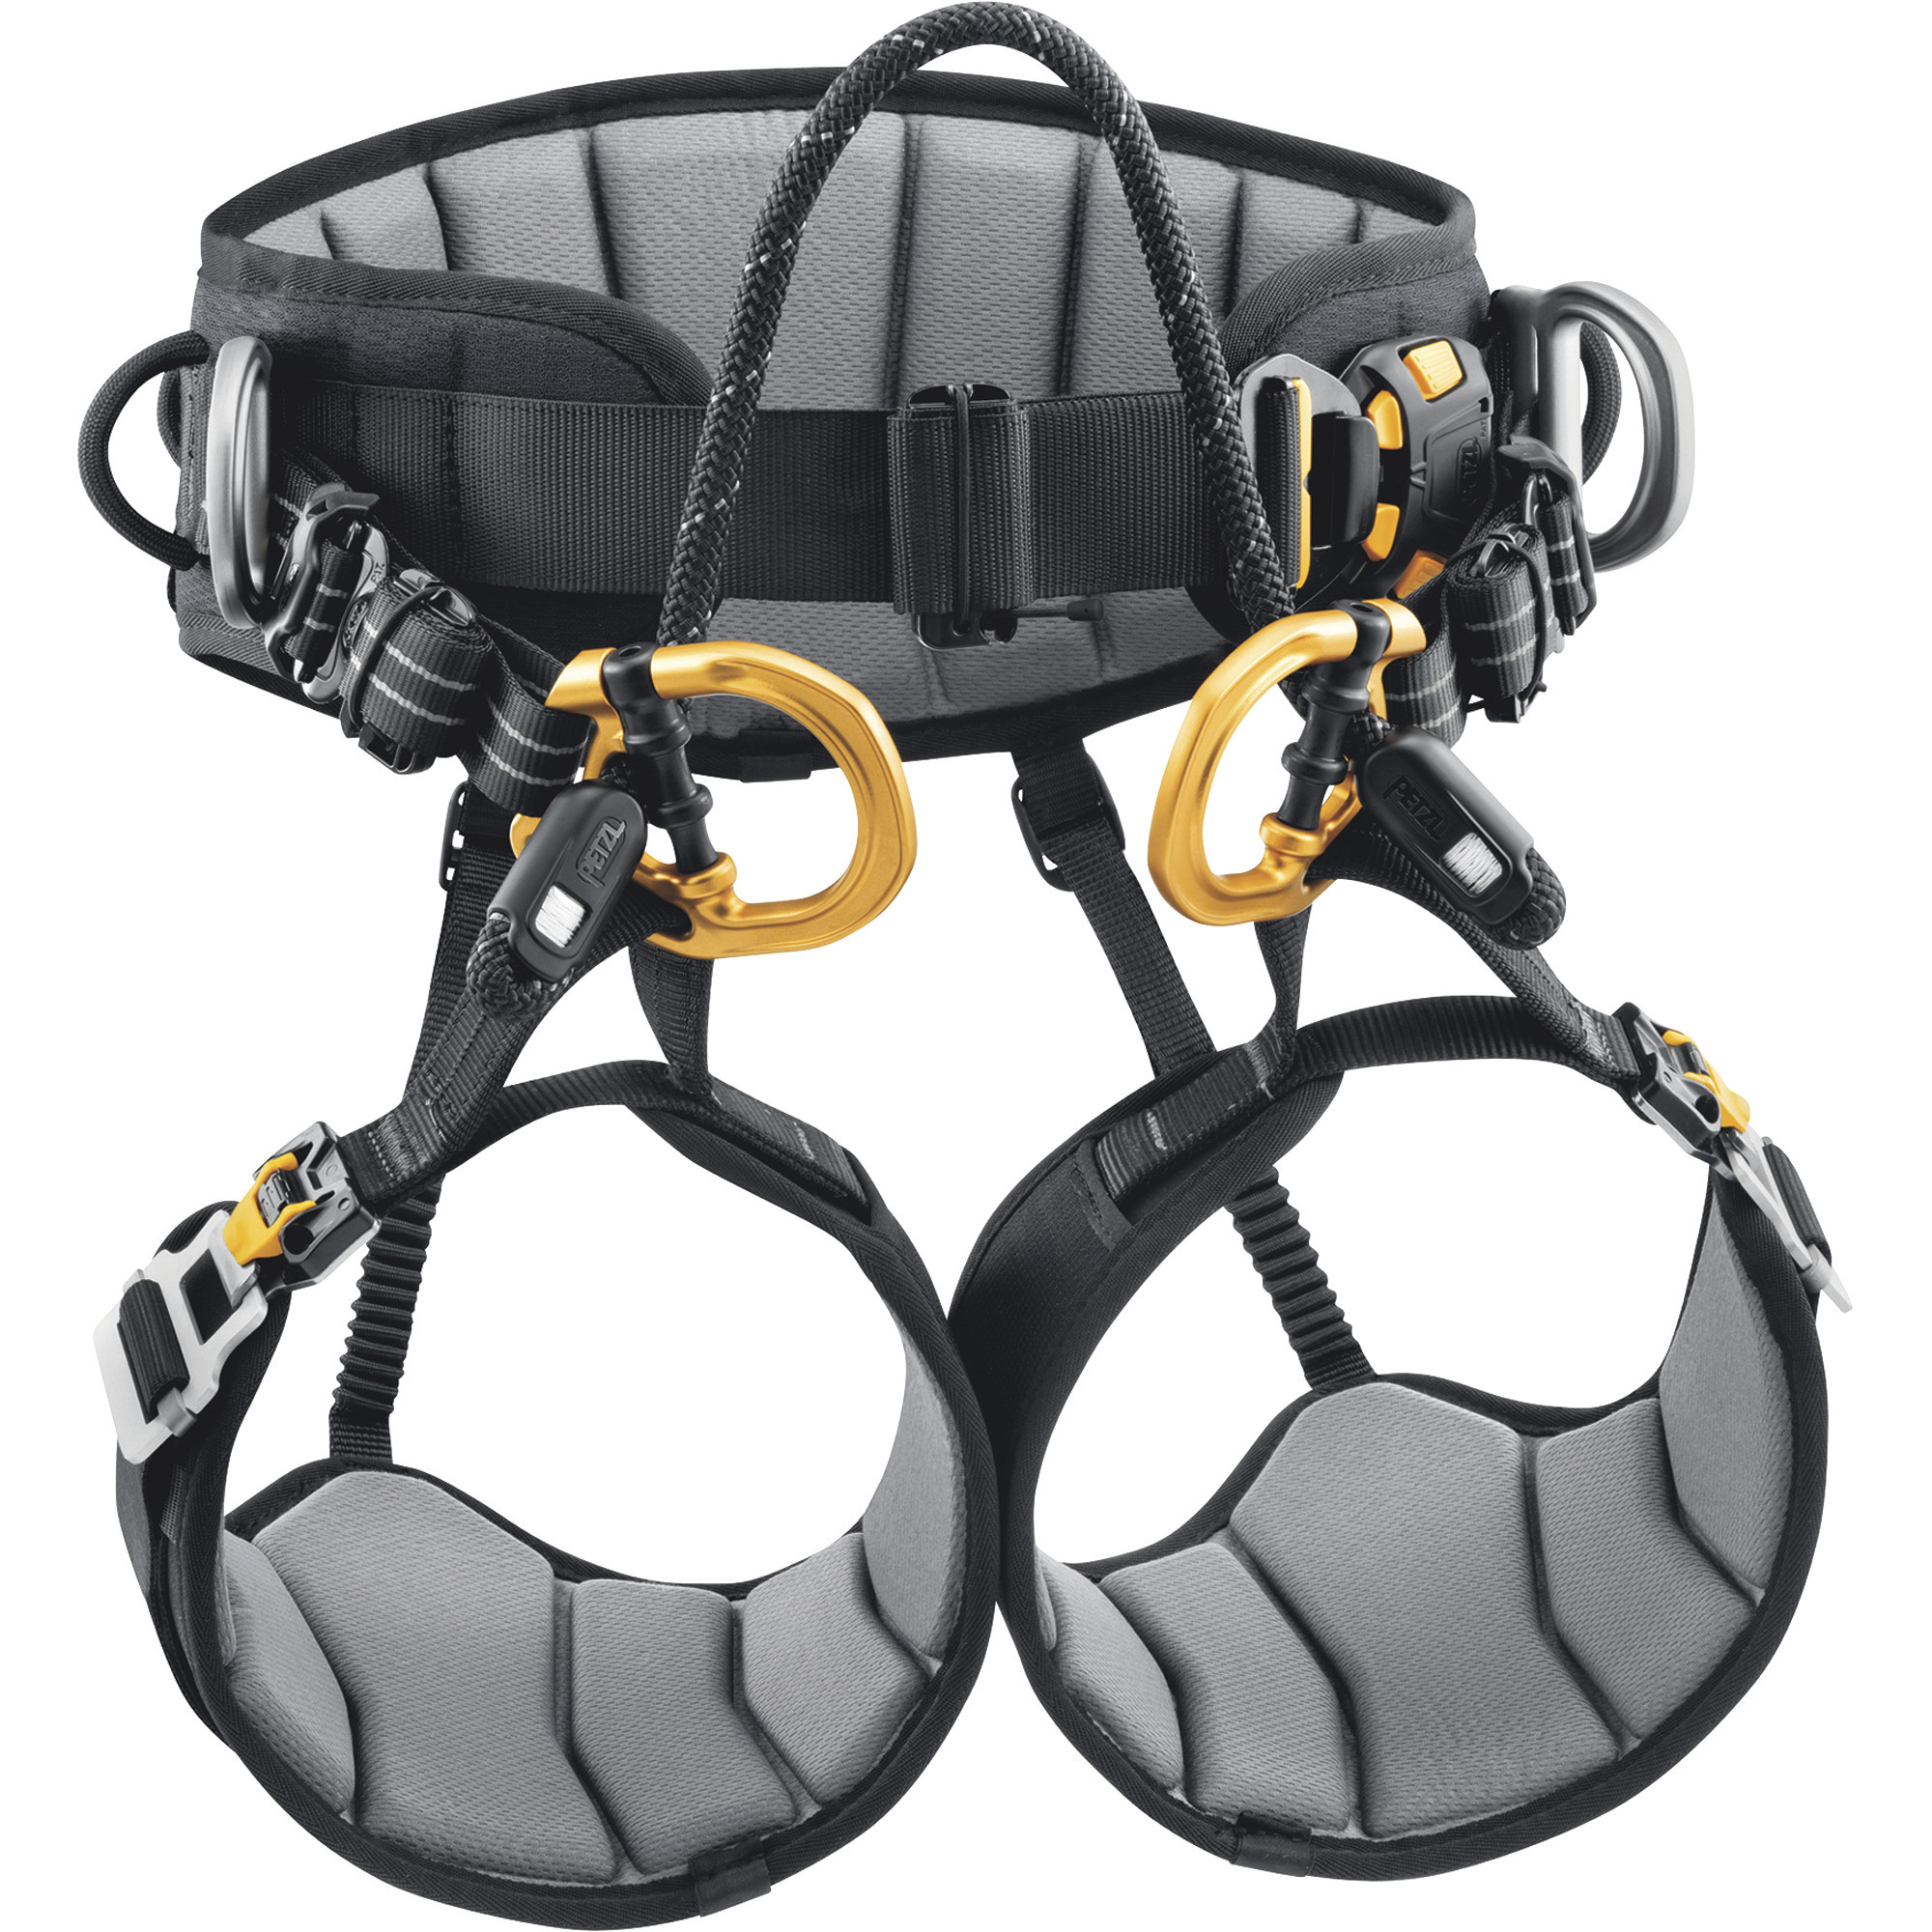 Petzl Sequoia Tree Care Harness Seat for Double-Rope Ascent Techniques, Size 2, 308-Lb. Capacity, Model C069AA02